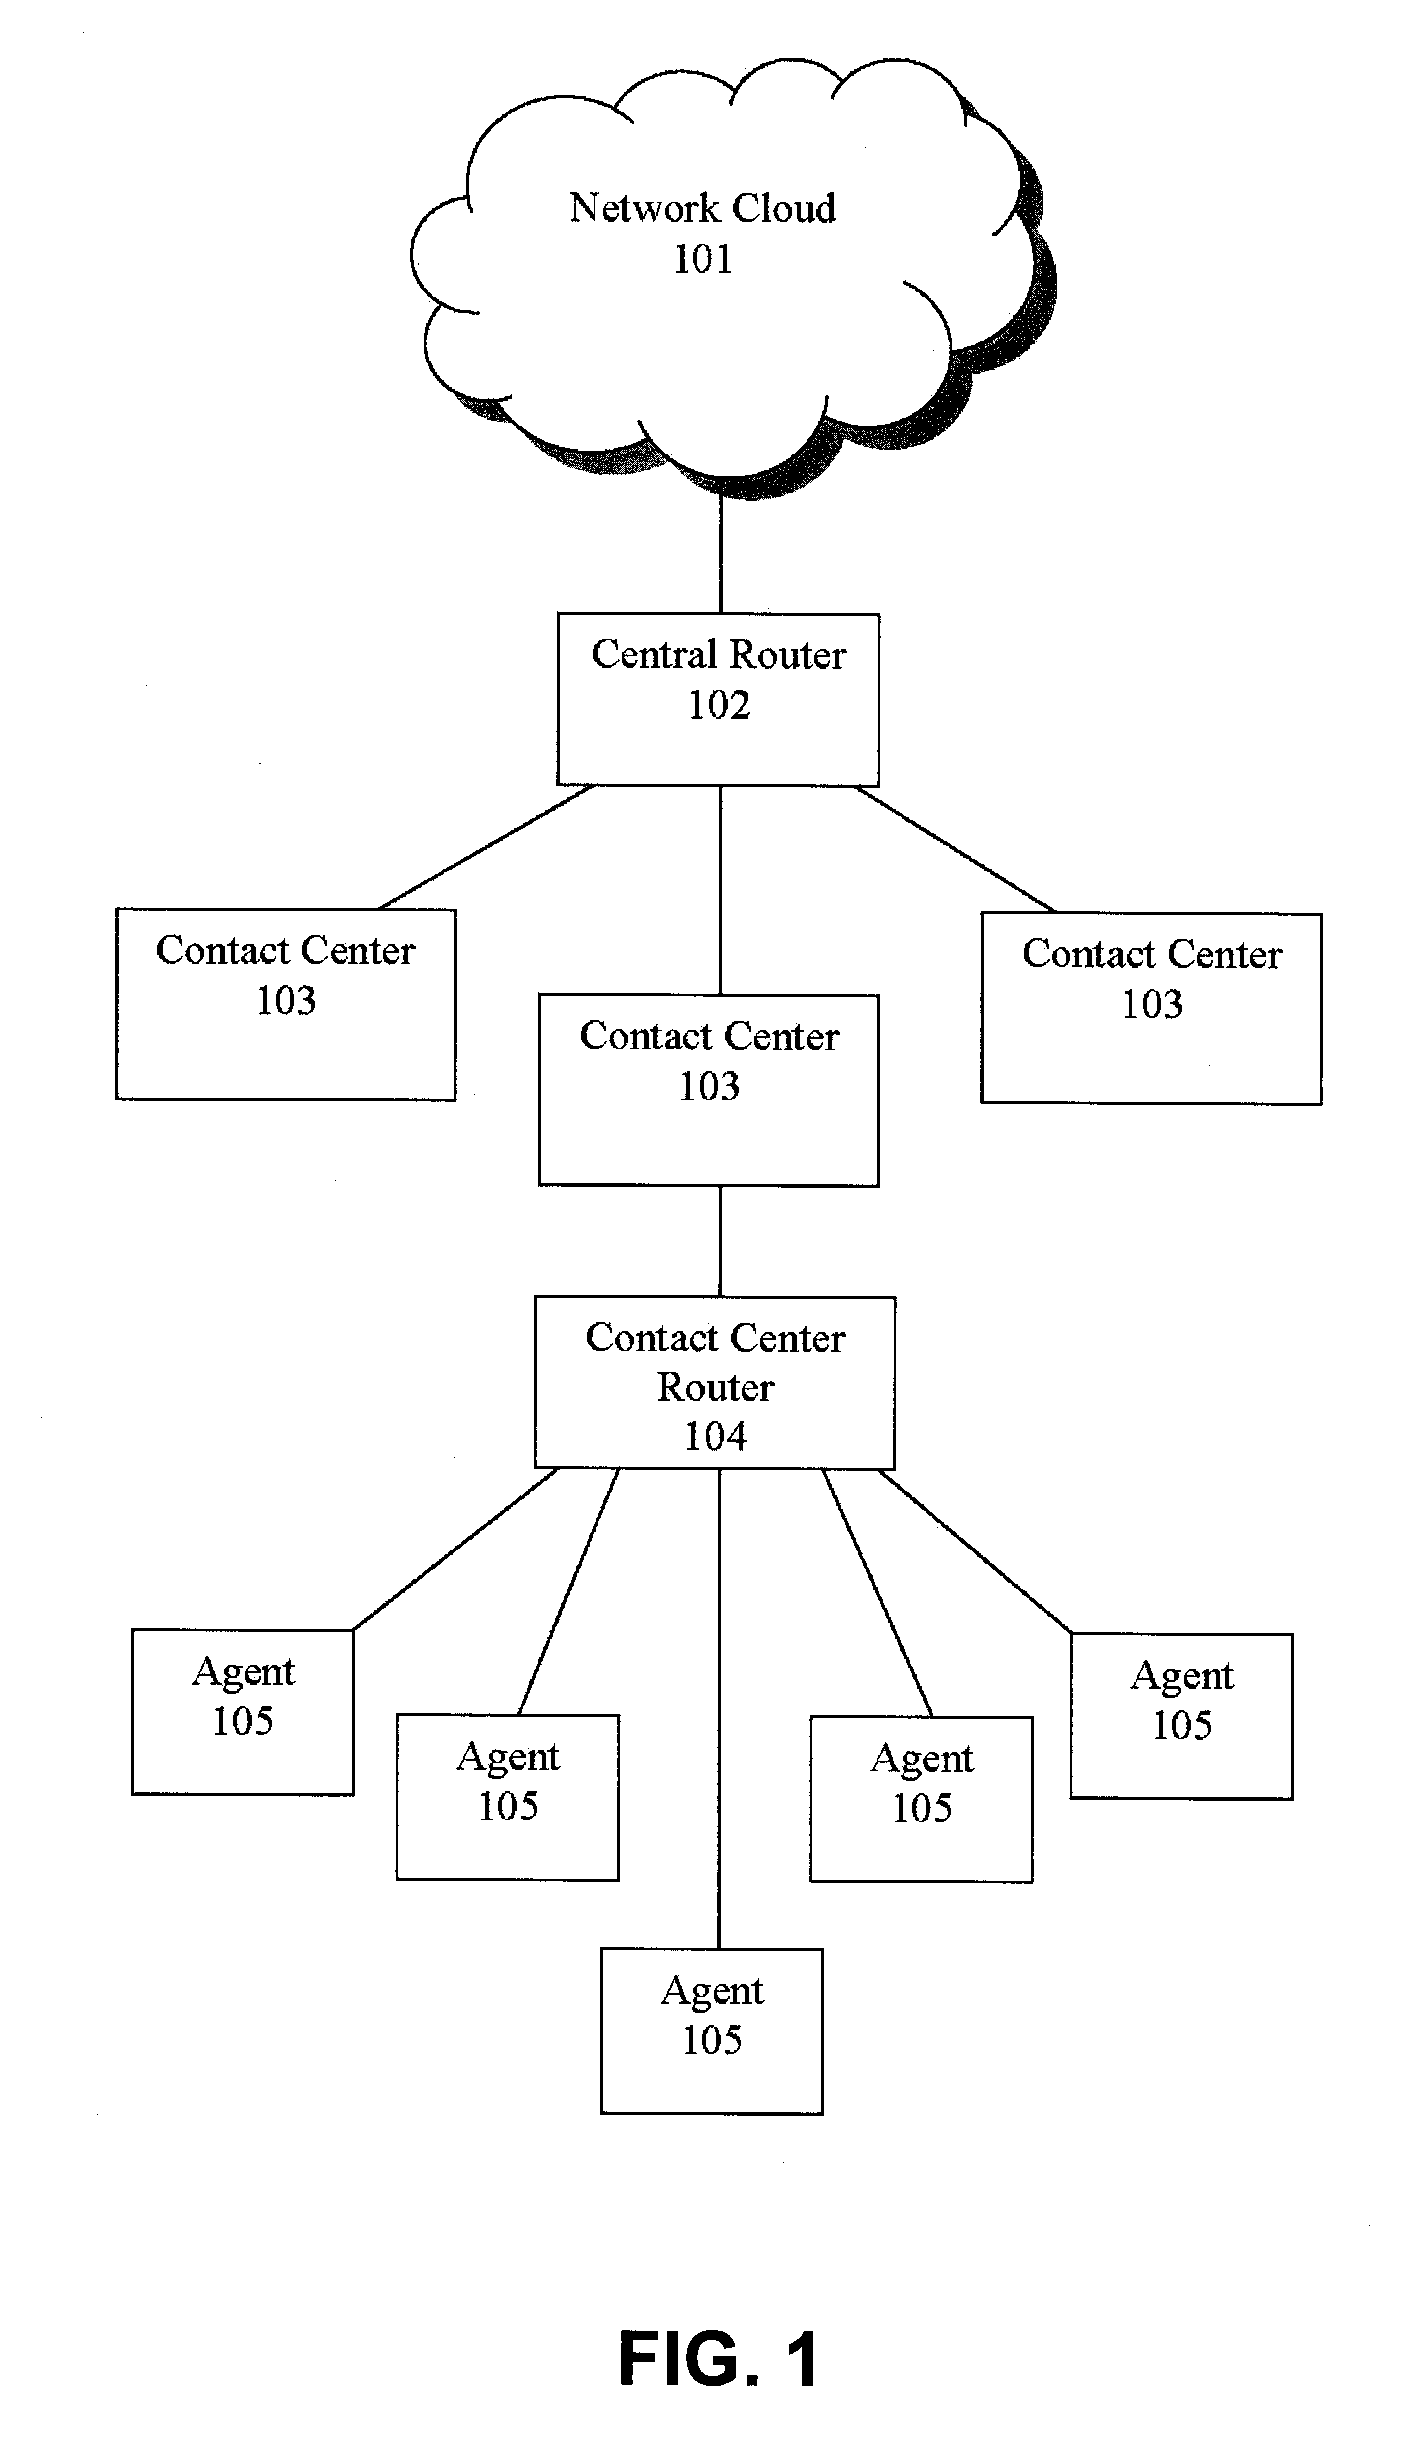 Pooling callers for matching to agents based on pattern matching algorithms